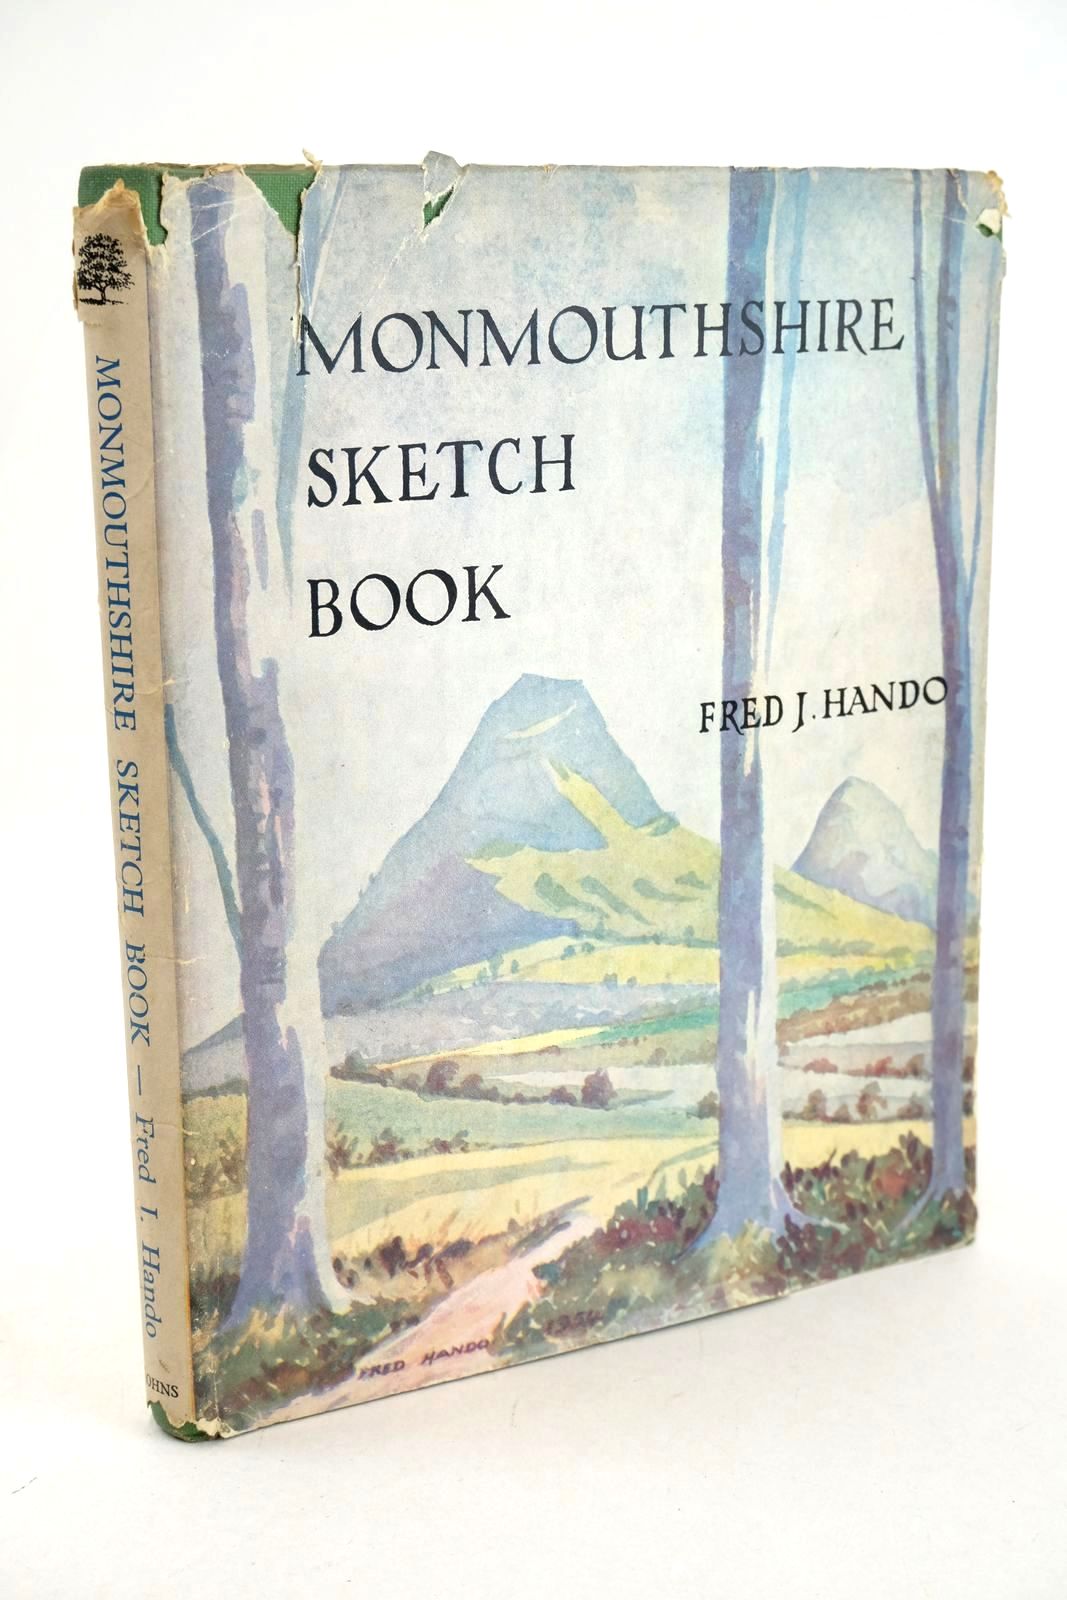 Photo of MONMOUTHSHIRE SKETCH BOOK written by Hando, Fred J. illustrated by Hando, Fred J. published by R.H. Johns Limited (STOCK CODE: 1327164)  for sale by Stella & Rose's Books